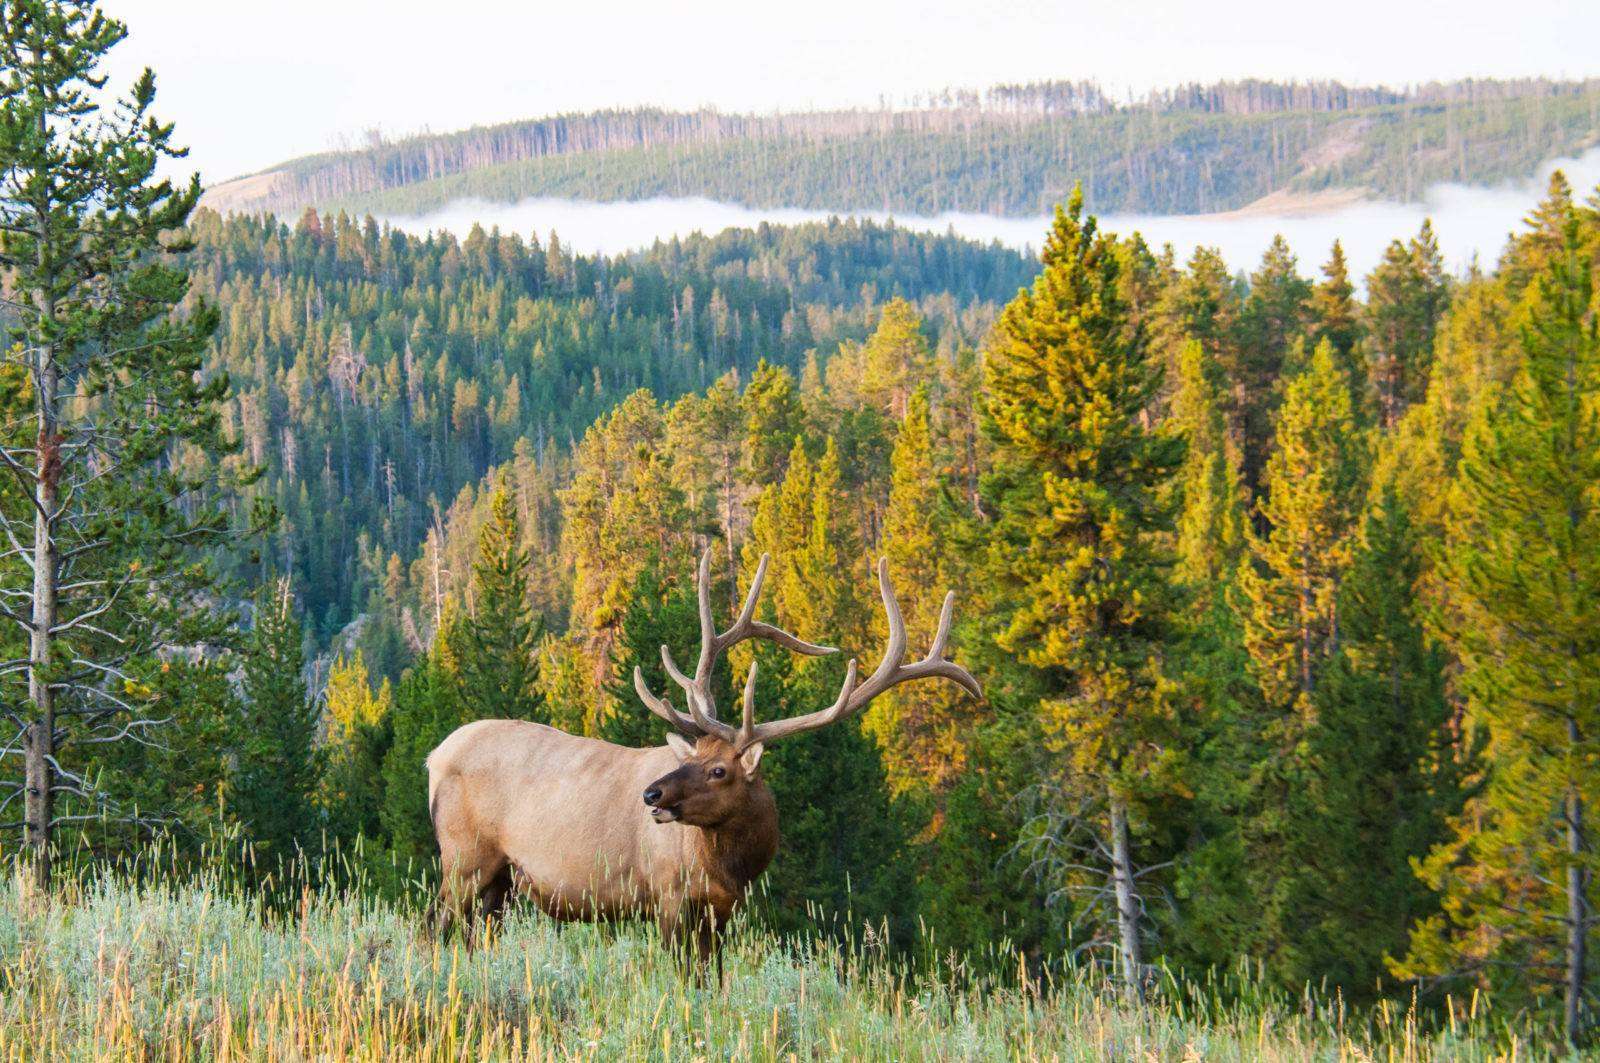 Antlered elk on the edge of a heavily forested hill